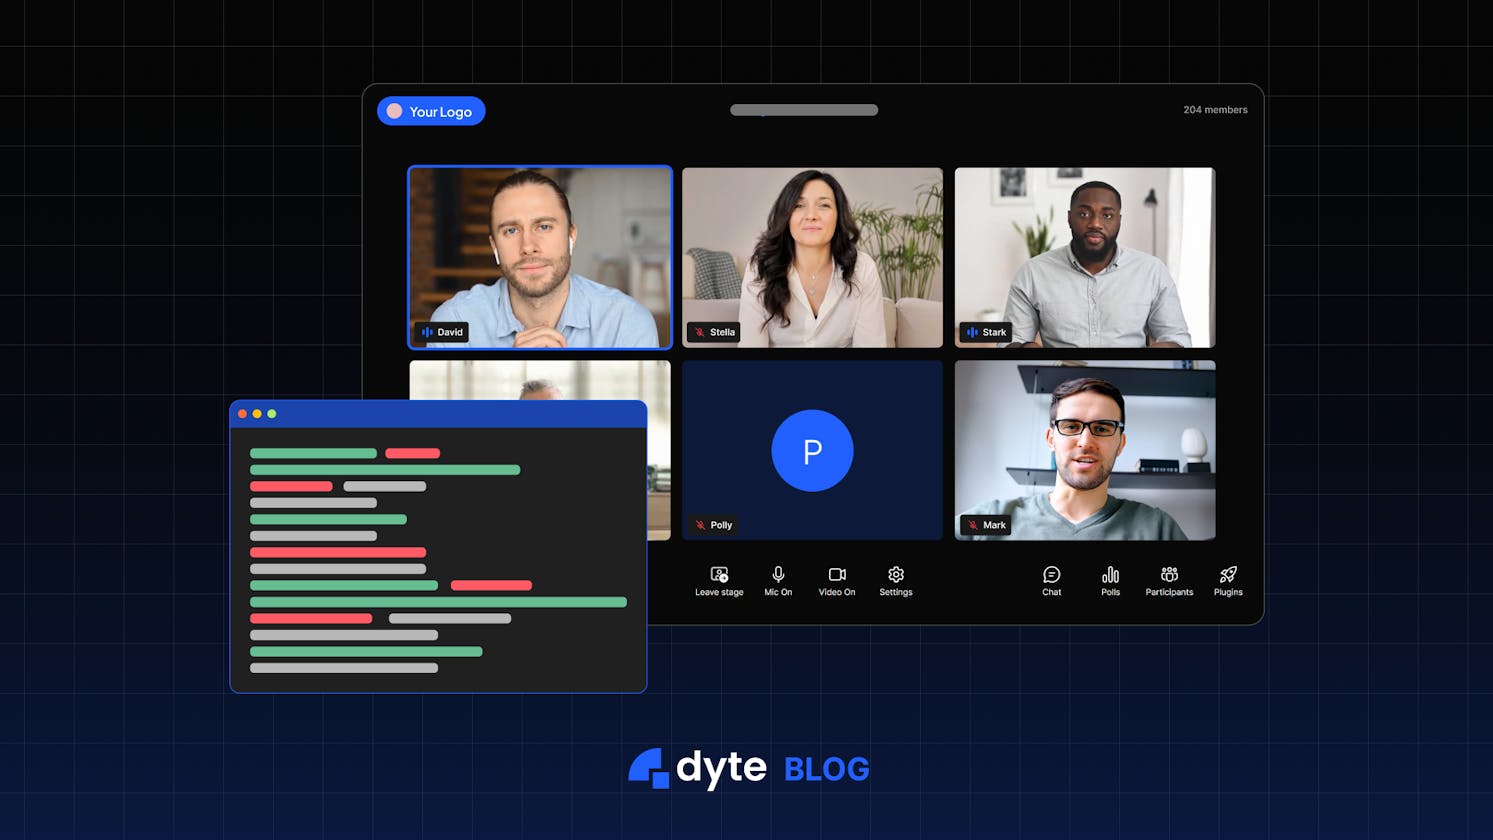 Building a Video Calling App Using WPF & Dyte